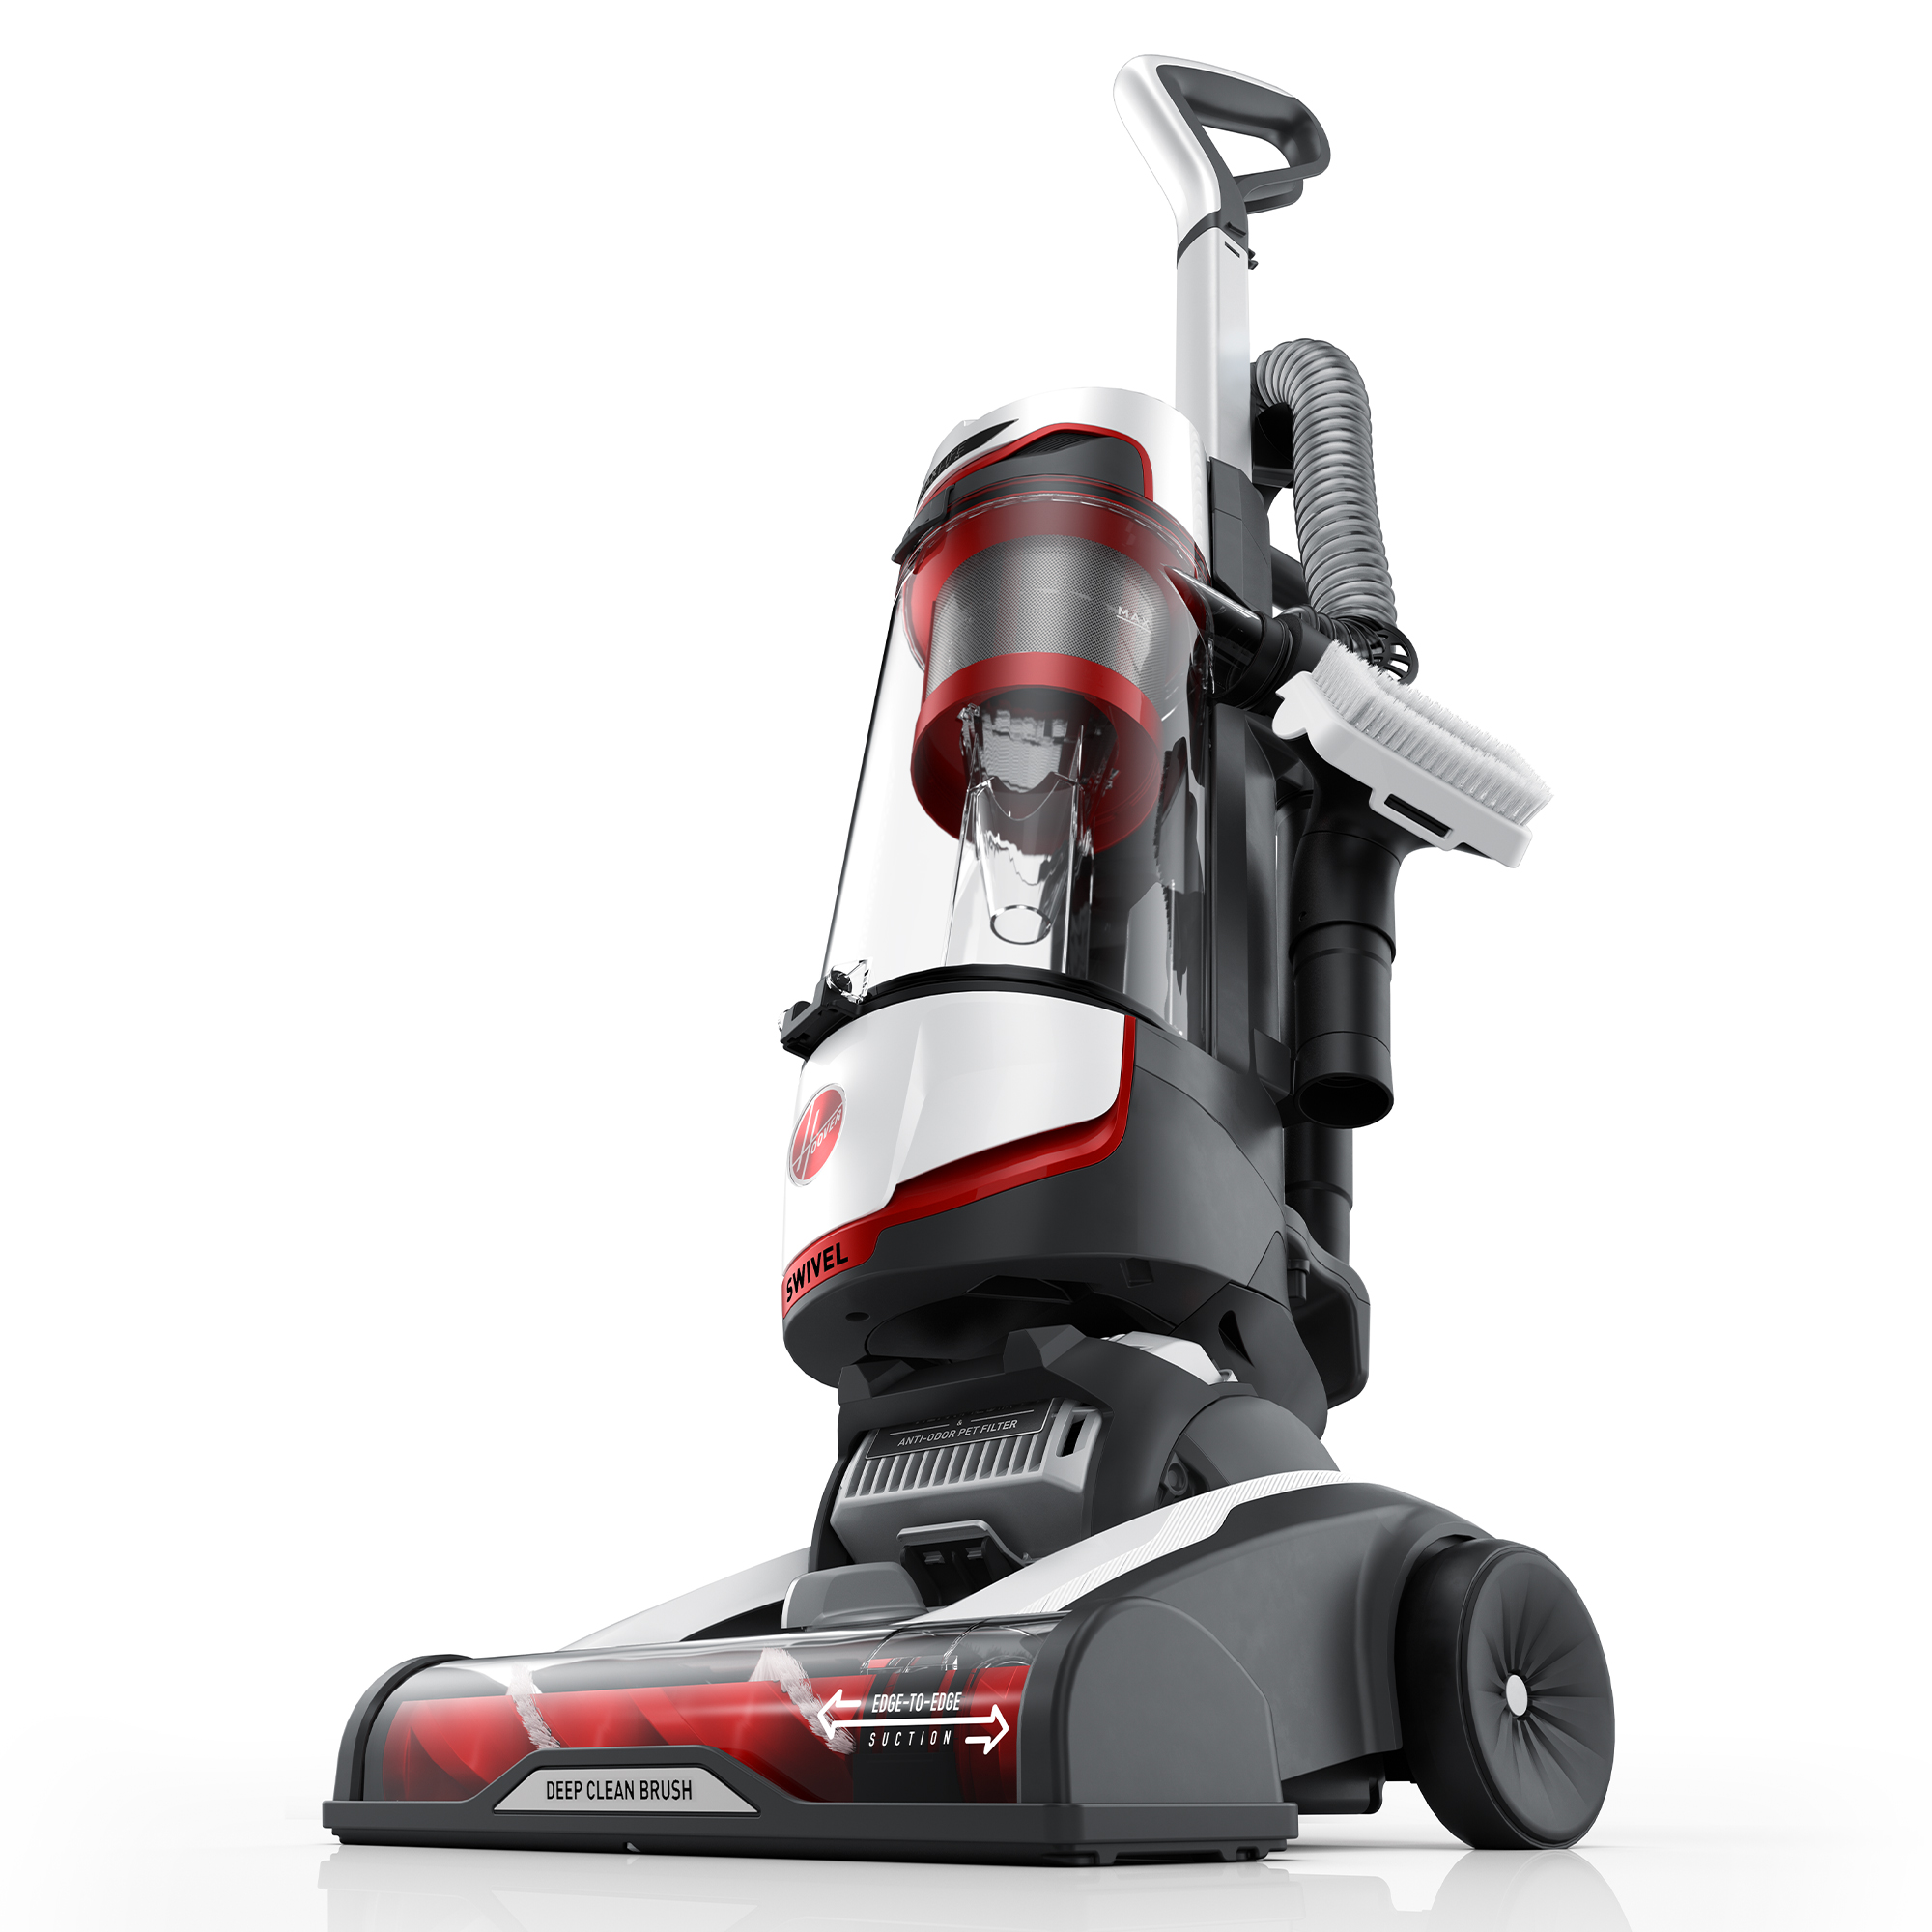 Hoover MAXLife PowerDrive Elite High Performance Swivel XL Bagless Upright Vacuum Cleaner with HEPA Media Filtration, UH75110, New - image 4 of 13